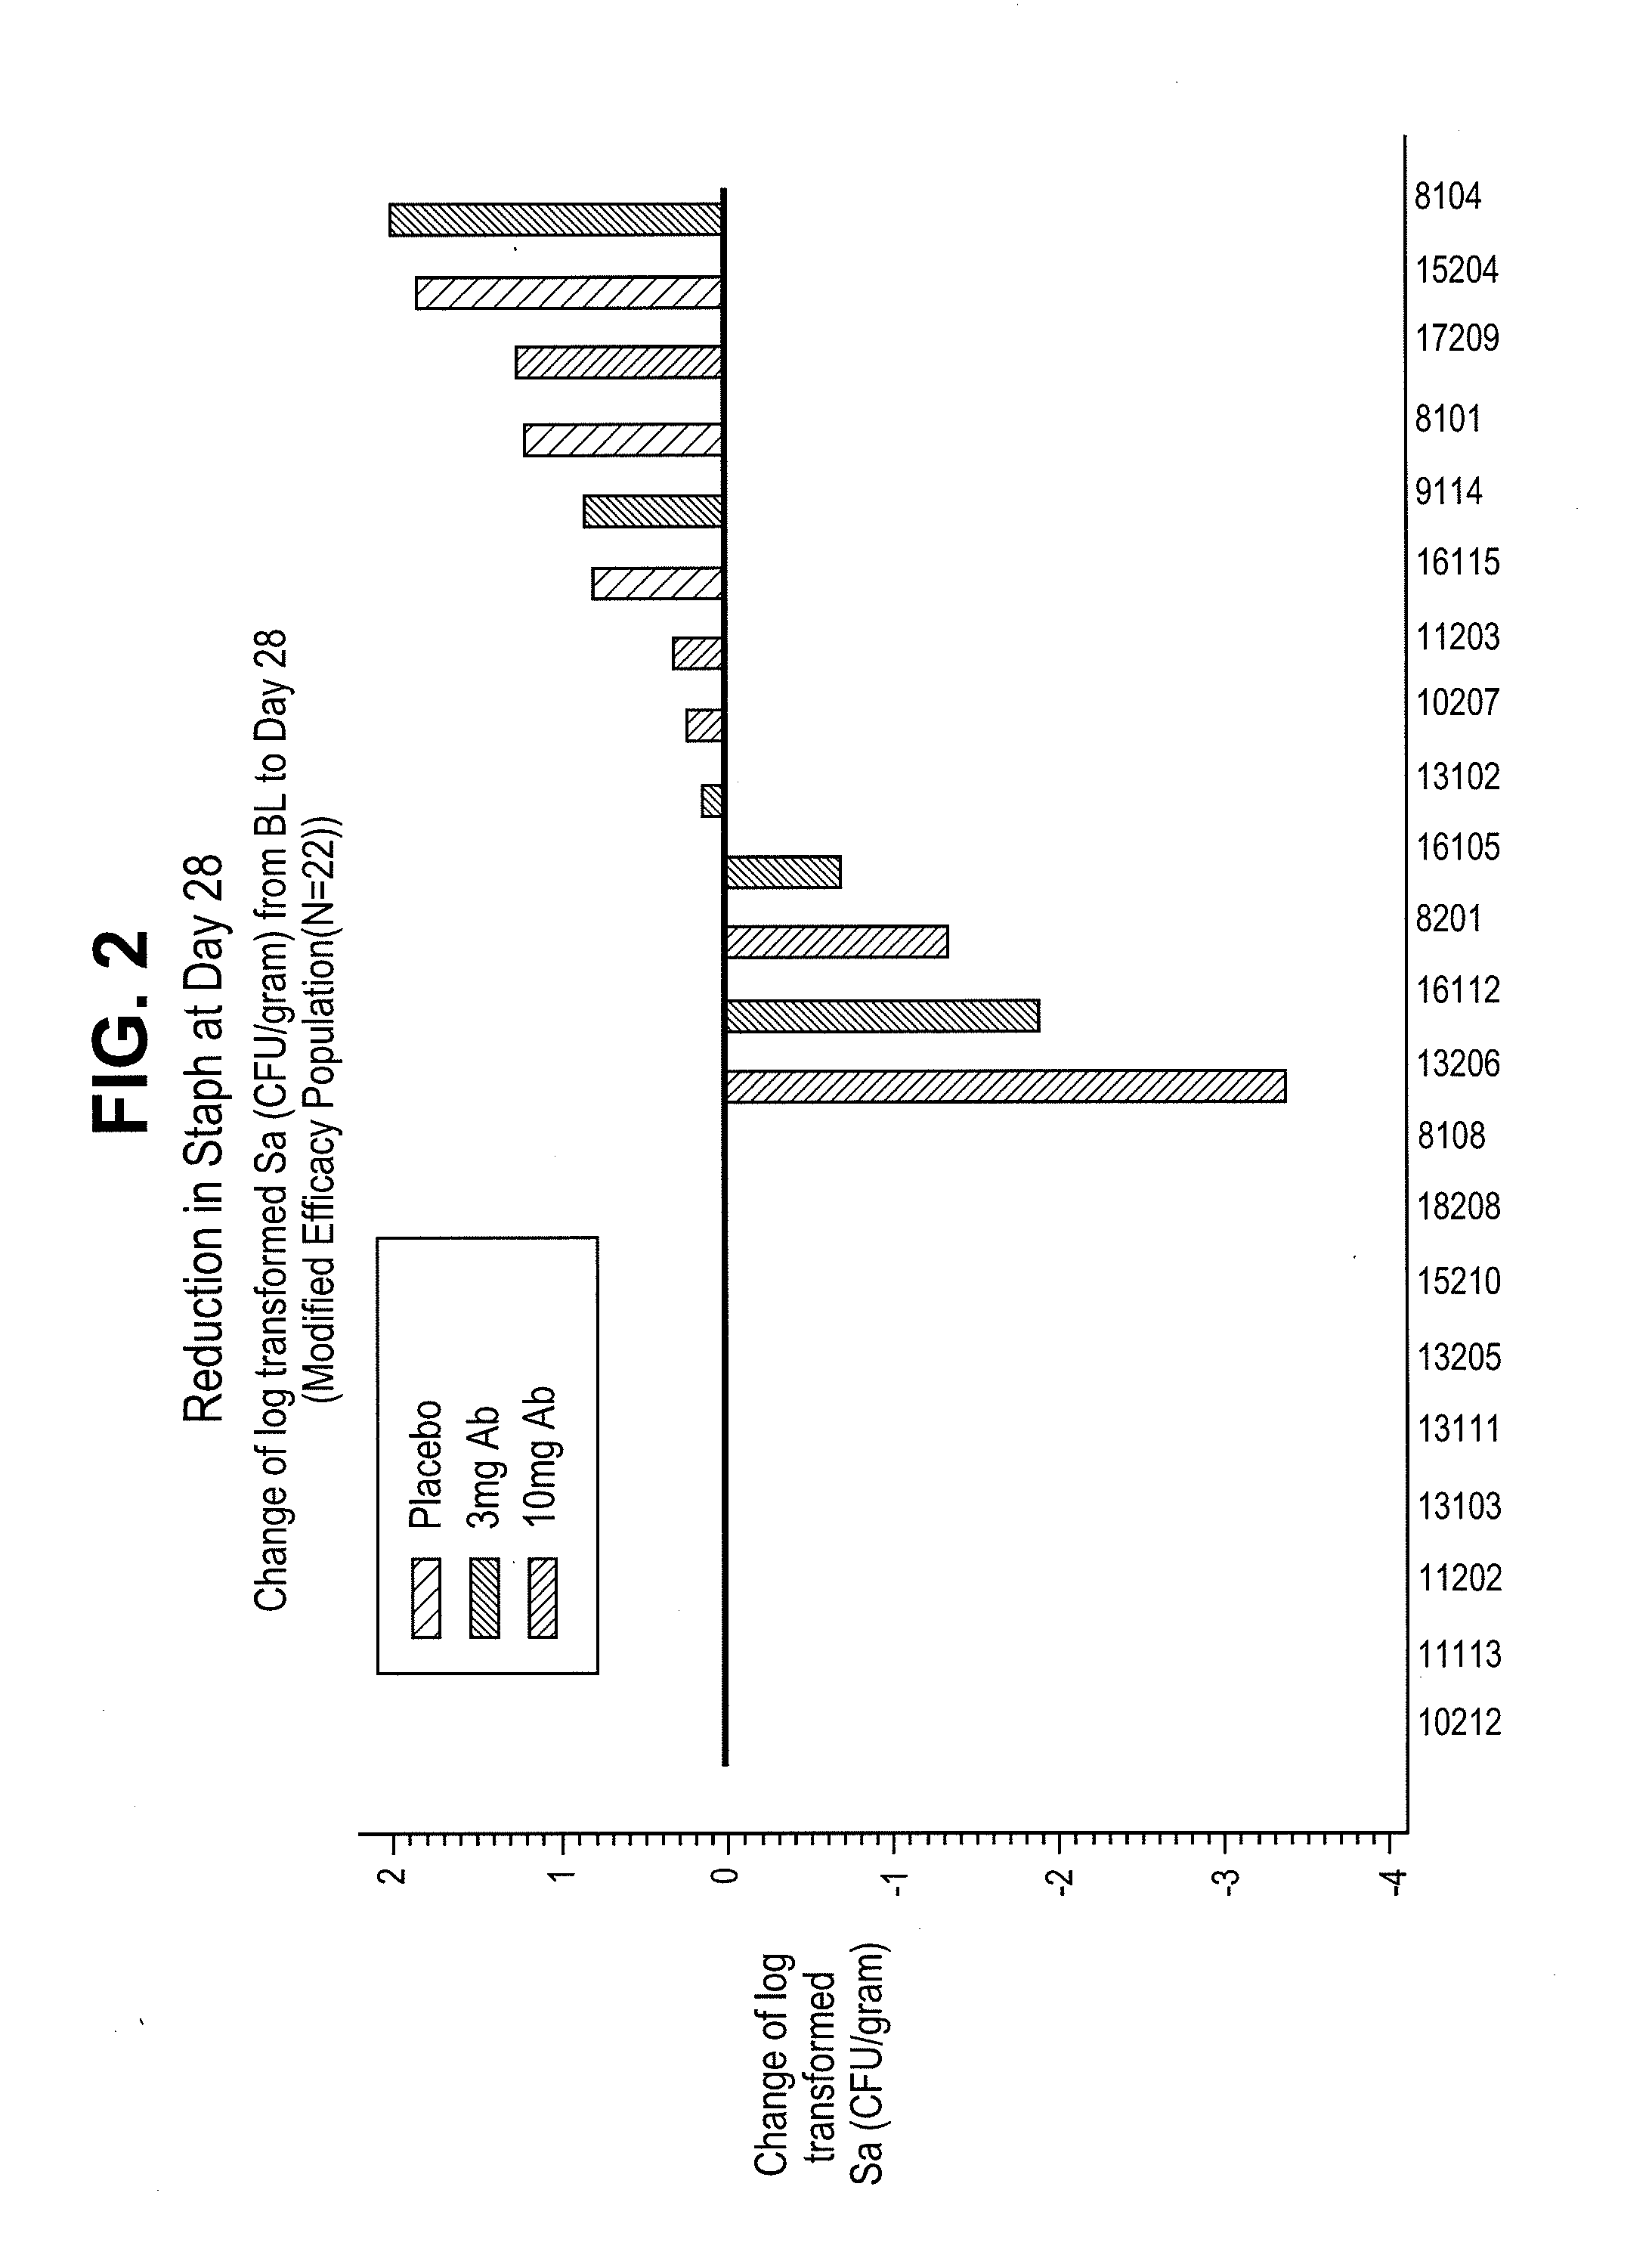 Method of treating a staphylococcus infection in a patient having a low-level pathogenic pseudomonas aeruginosa infection